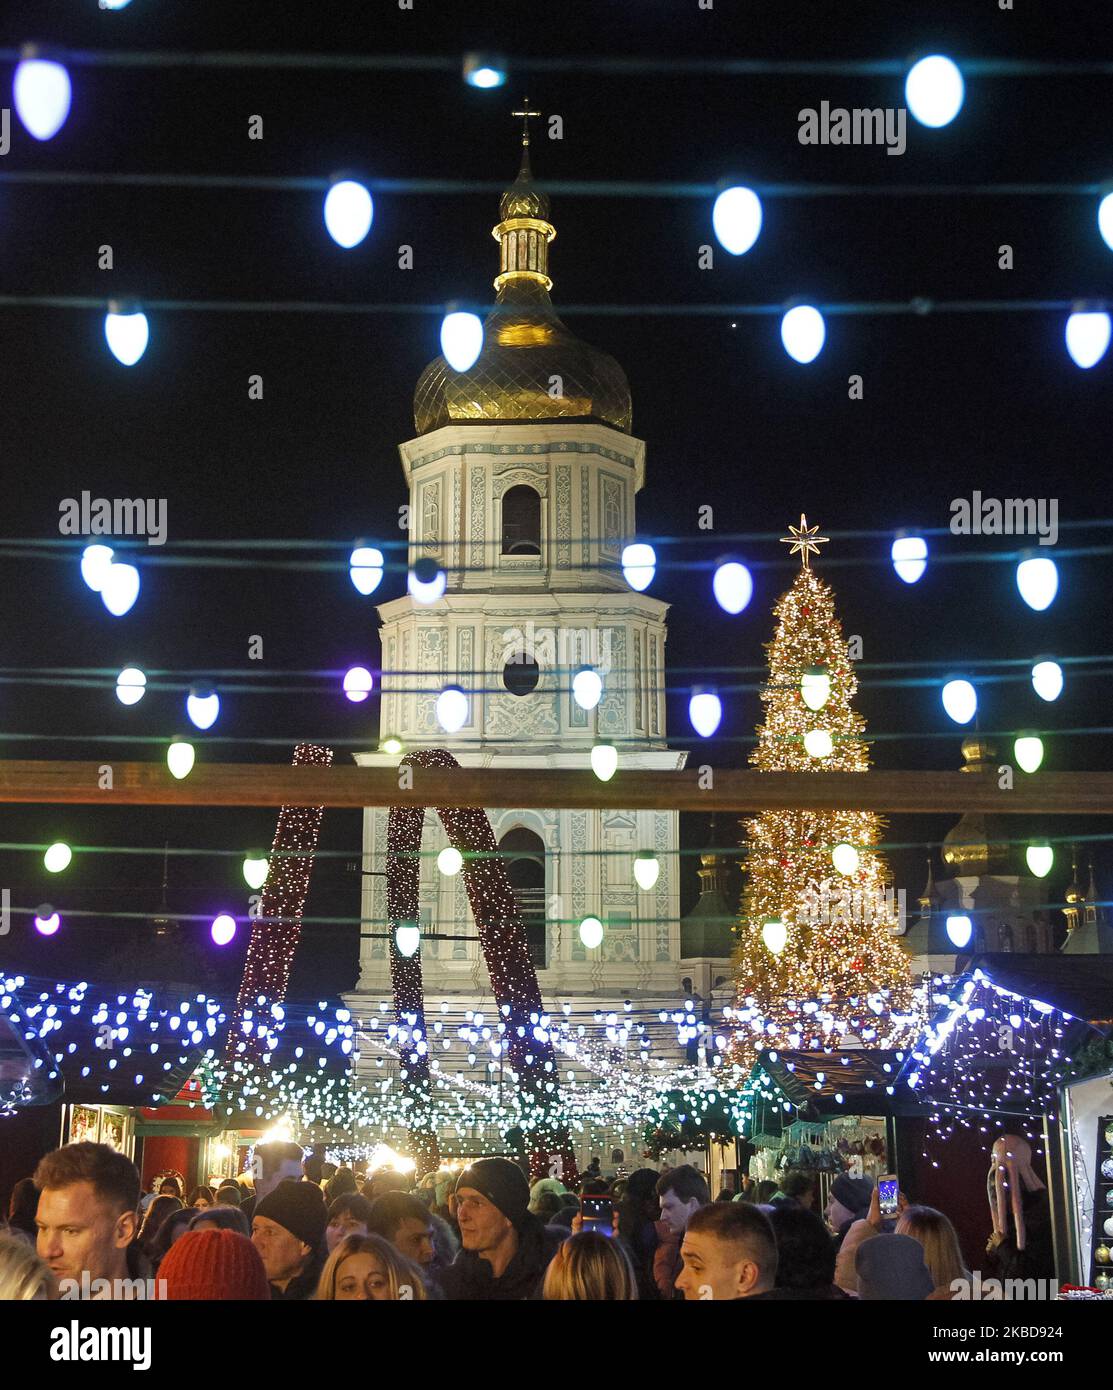 The main Christmas Tree of Ukraine lit up at St. Sophia's Square, in Kiev, Ukraine, 19 December, 2019. The main Ukrainian Christmas tree which is more than 20 meters high, decorated with some one thousands candy toys and about 4 kilometers of glowing garlands, as local media reported. The characters from the ballet 'Nutcracker' and Ukrainian fairy tales installed around the tree. The Christmas tree lighting ceremony took place in Ukrainian capital on St. Nicholas Day on December 19, 2019. (Photo by STR/NurPhoto) Stock Photo